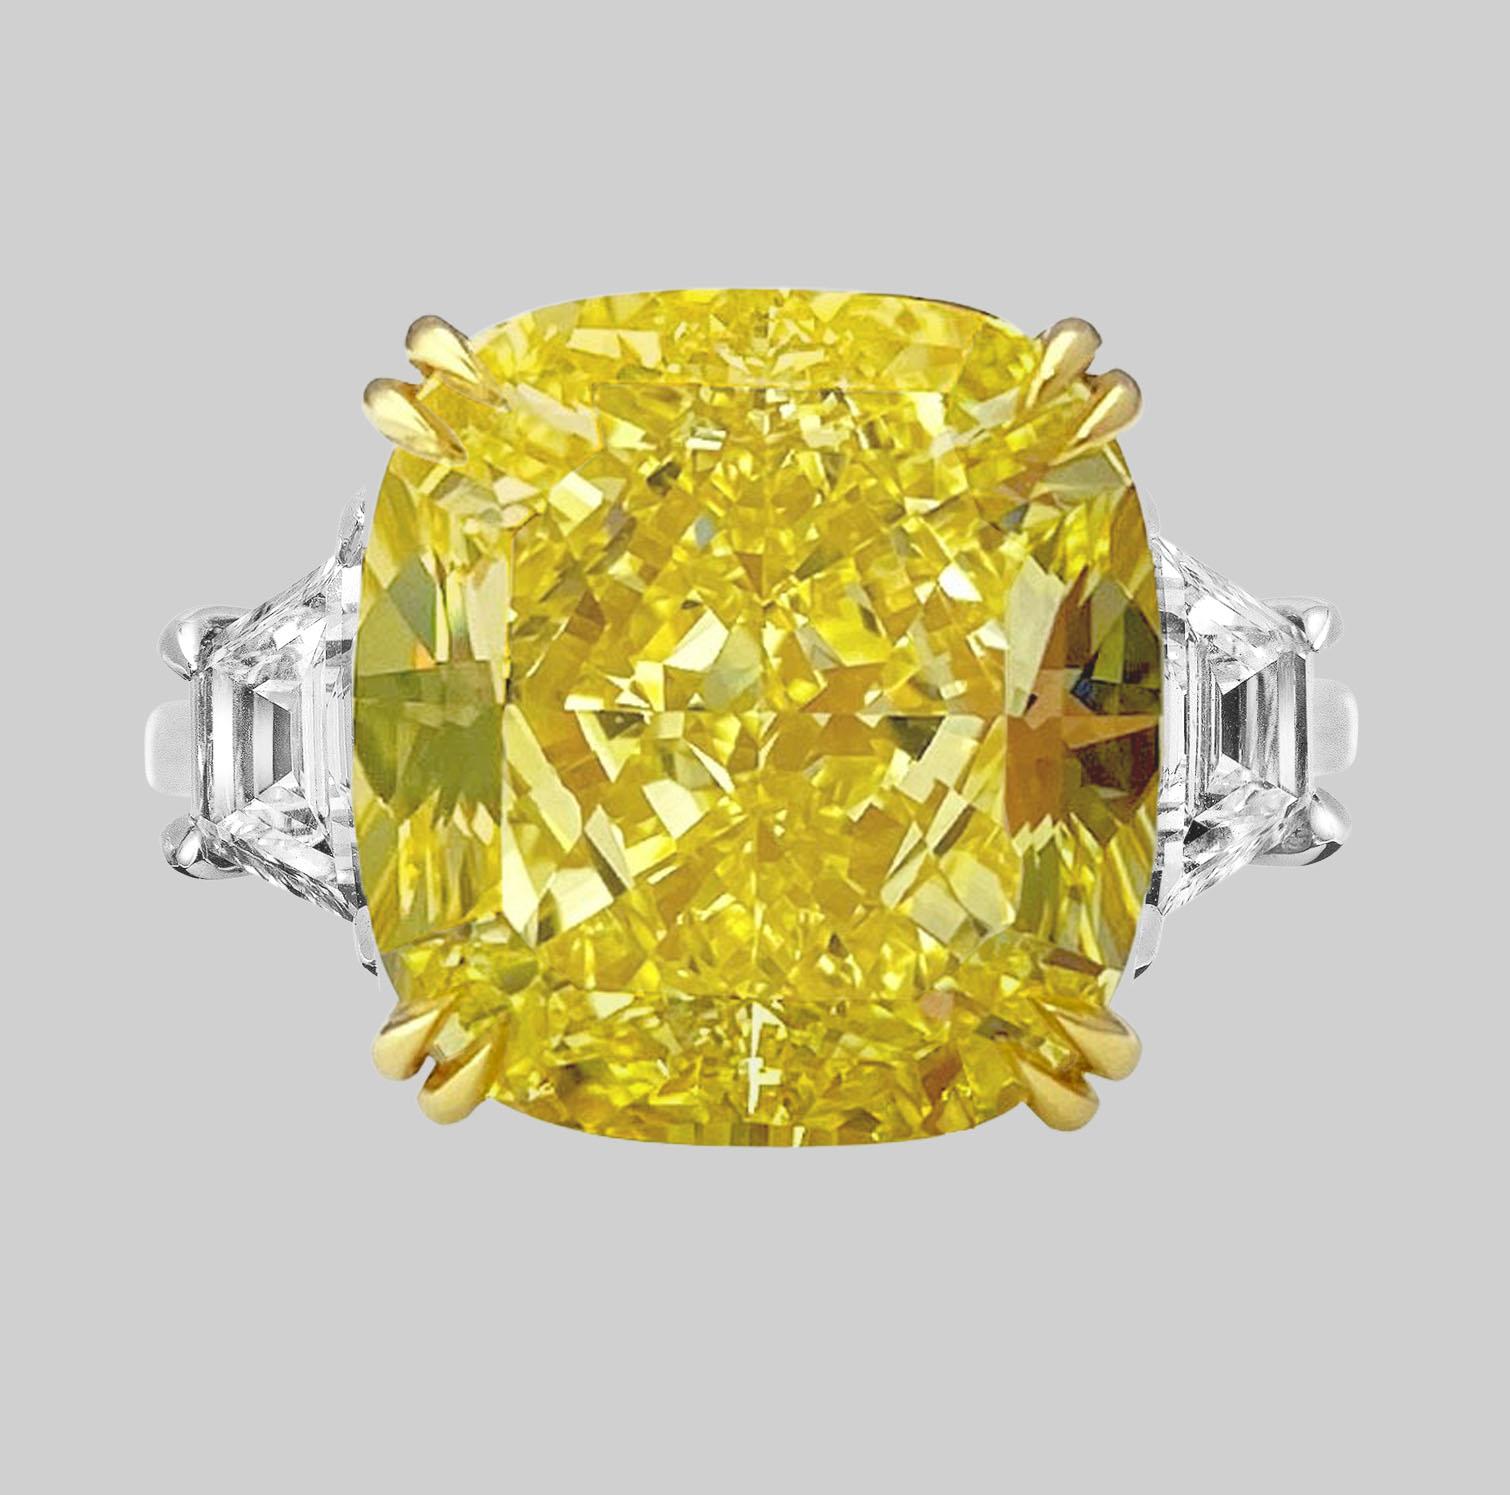 Modern EXCEPTIONAL GIA Certified 23 Carat Fancy VIVID Yellow Diamond Ring For Sale